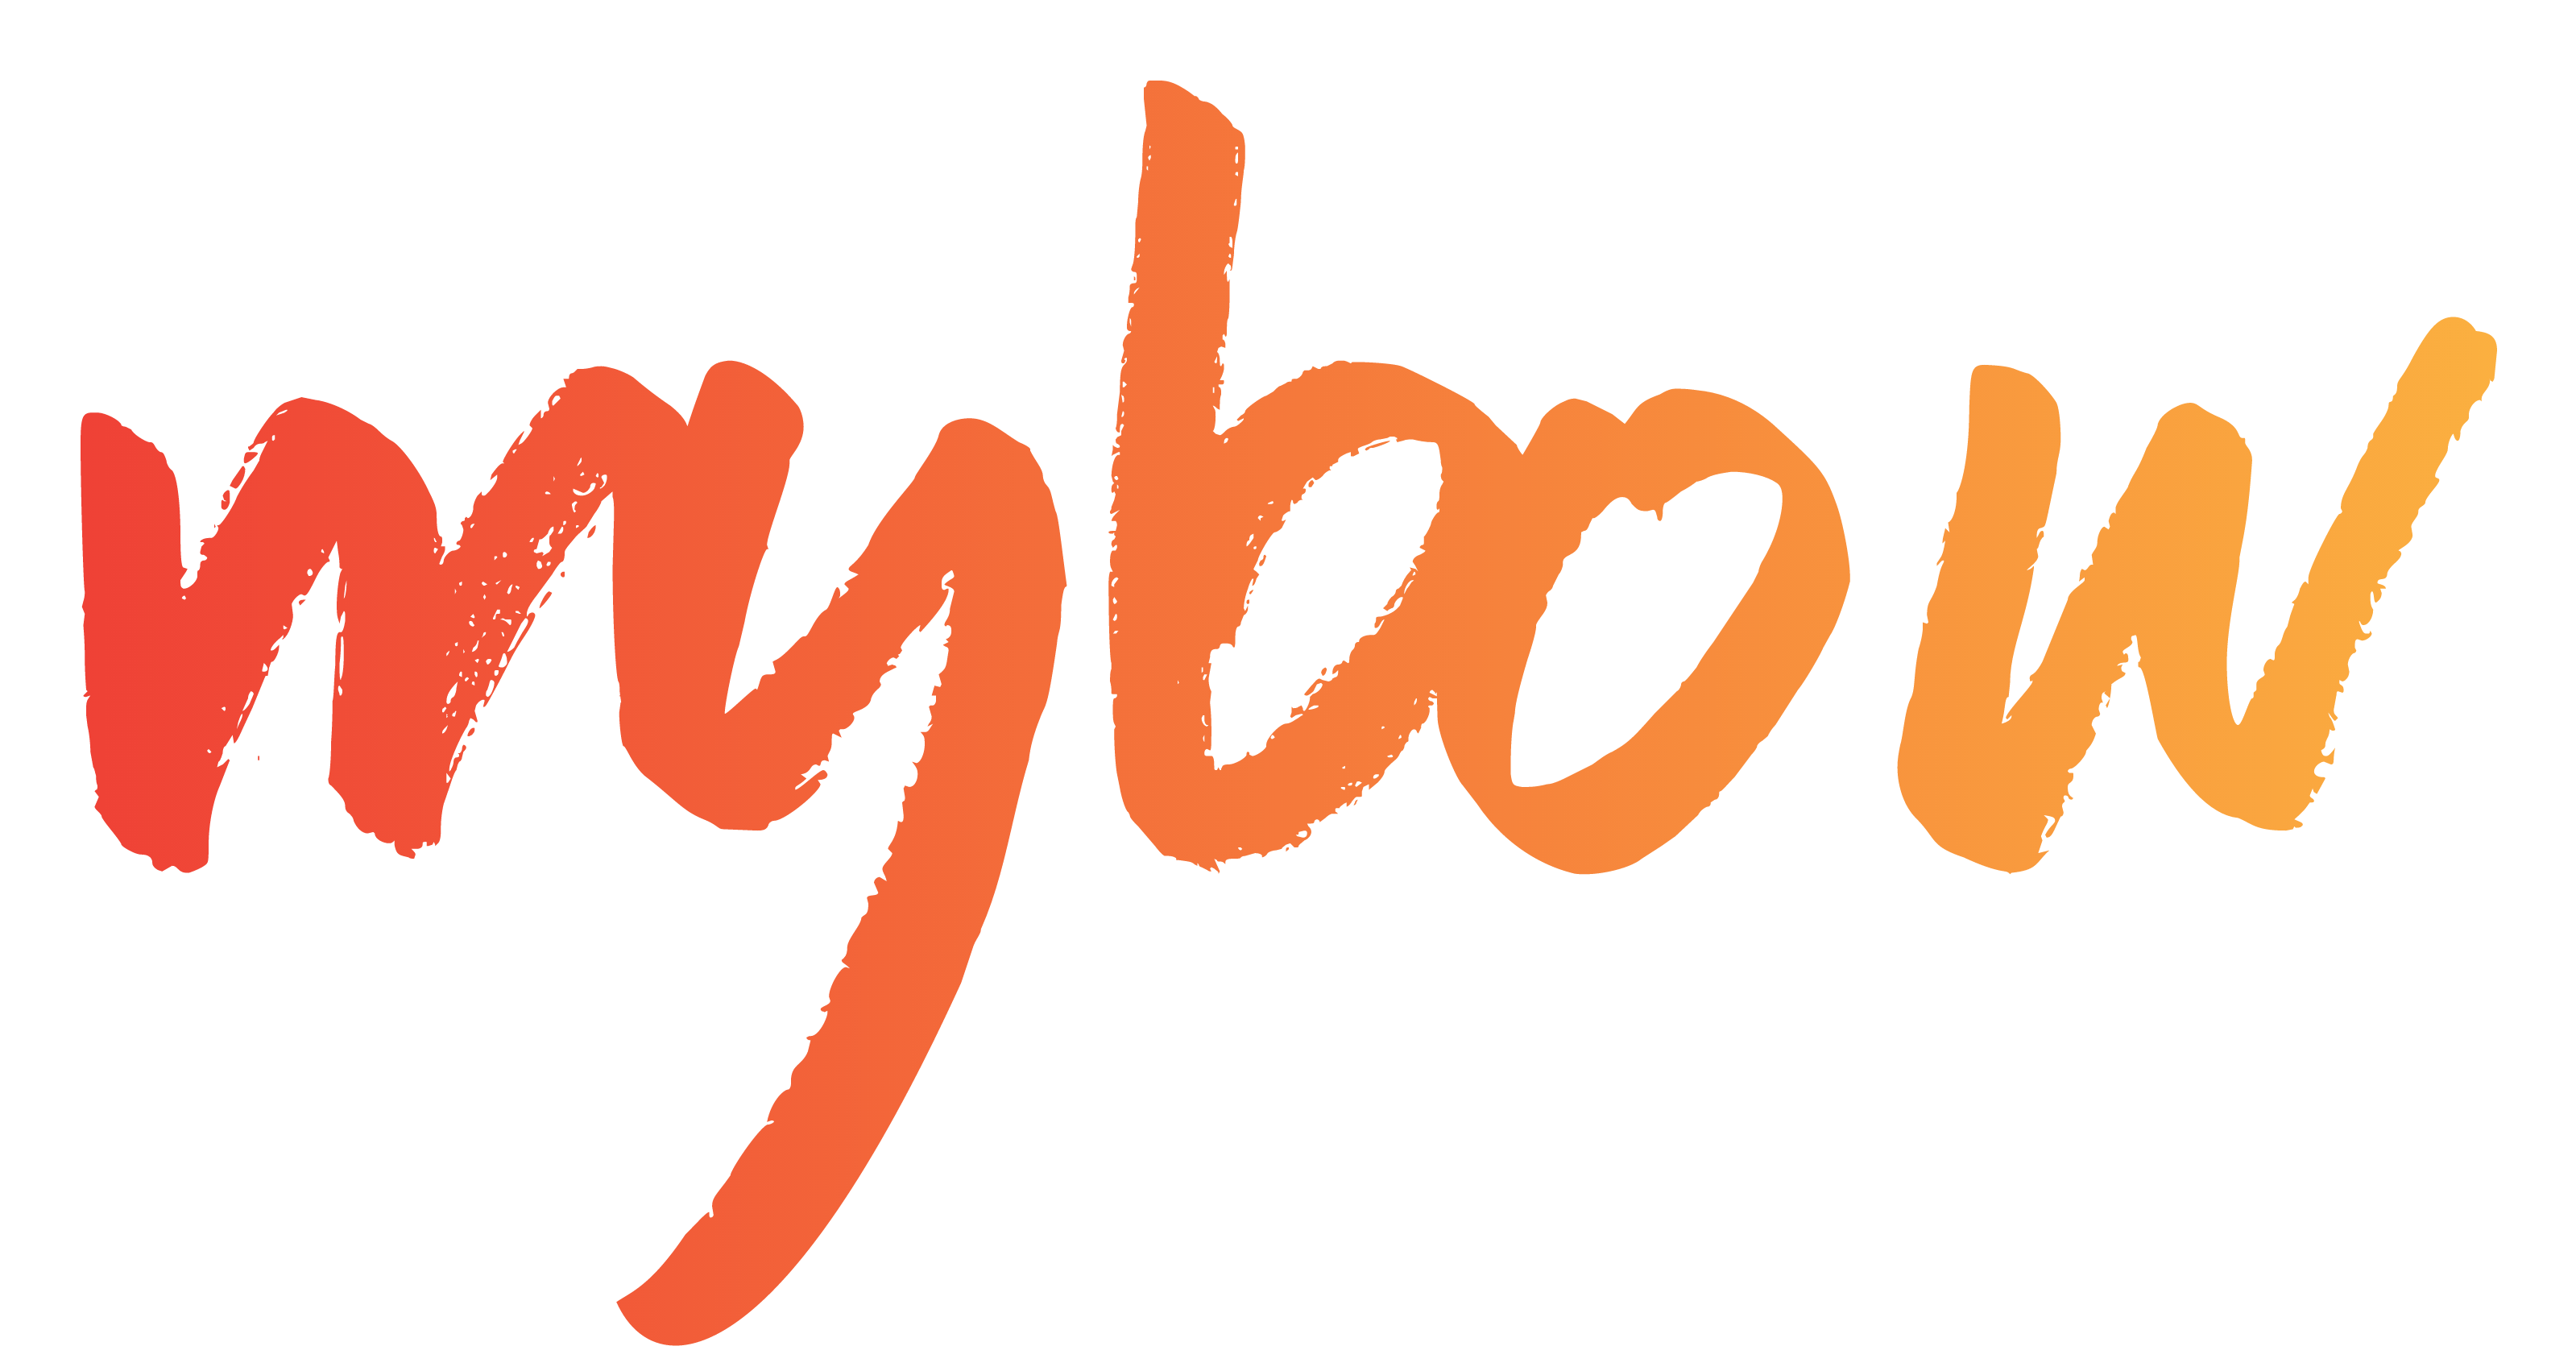 mybow Brand Consulting